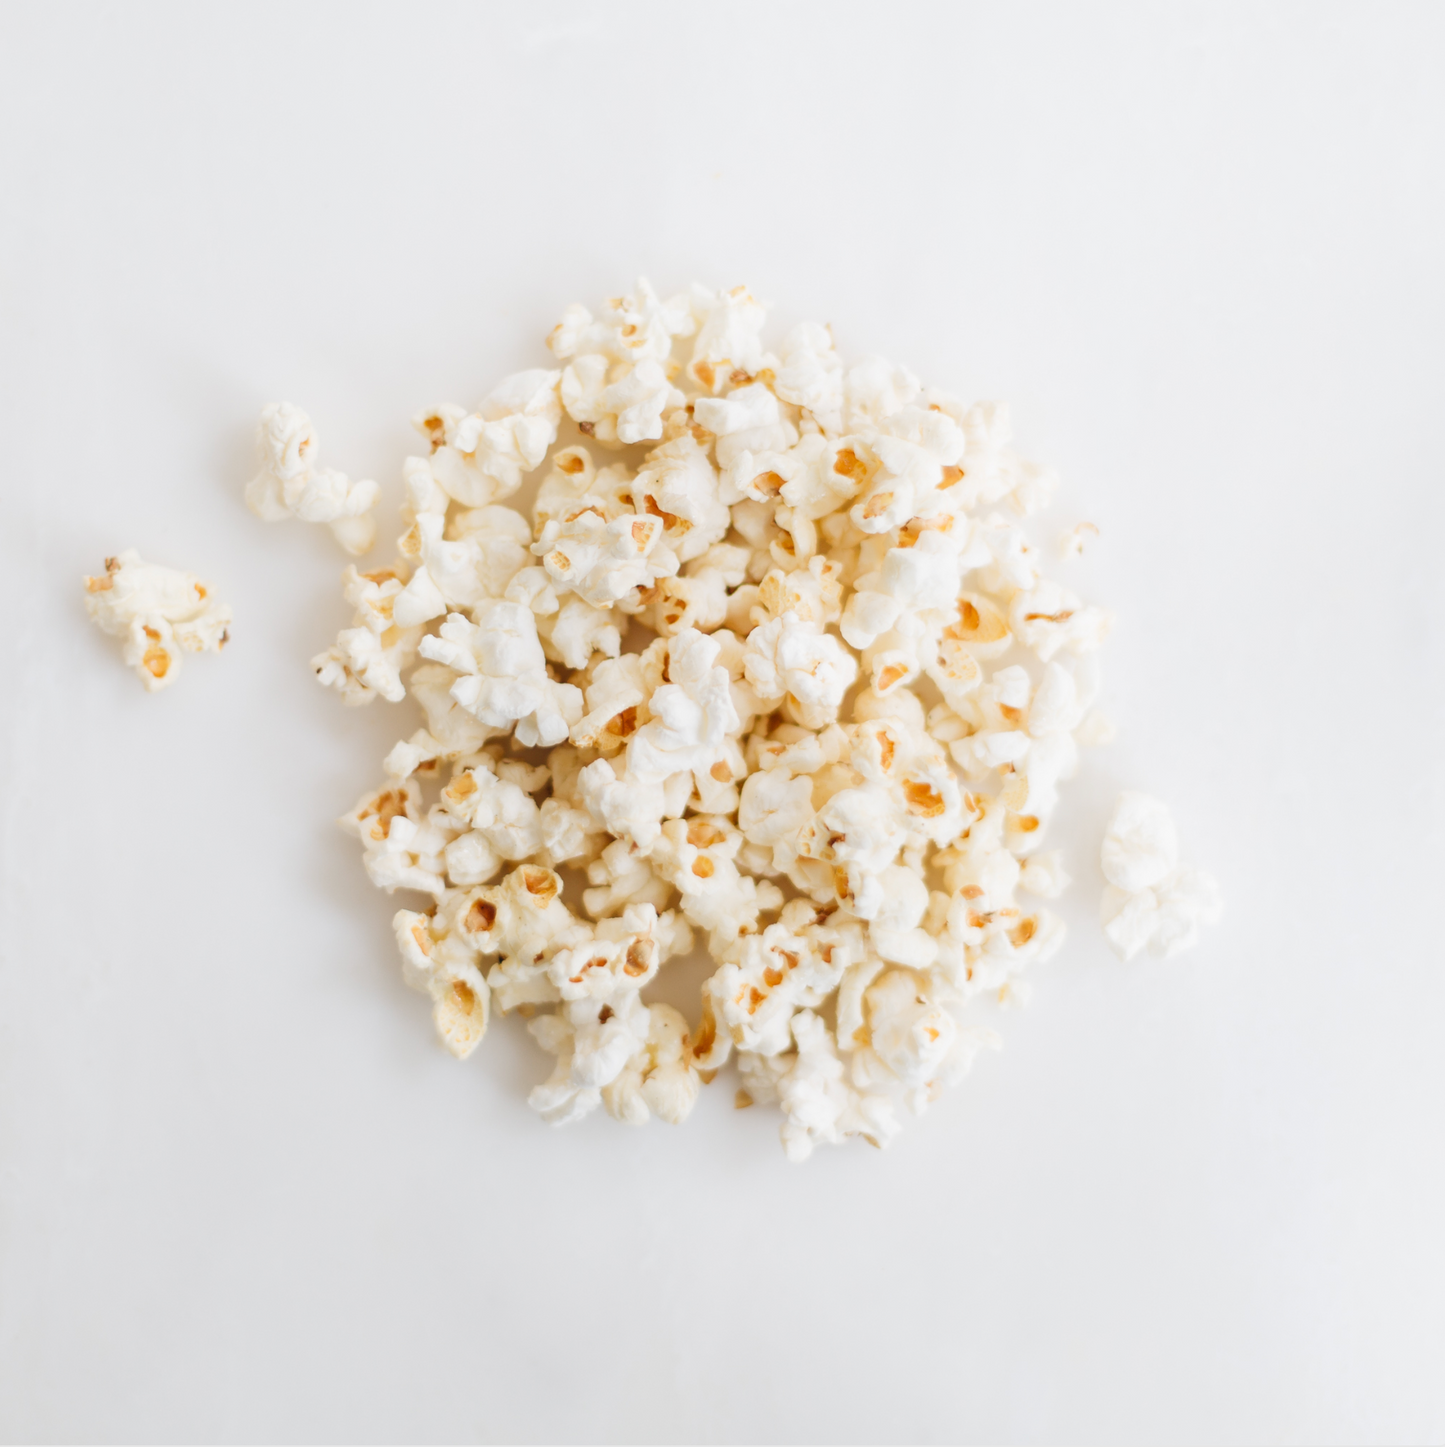 Salty, sweet, and the perfect crunch. Popnotch Goods Kettle Corn is an instant classic. Try this simple yet delicious treat. Order now online or stop in Popnotch Goods to get yourself a bag!